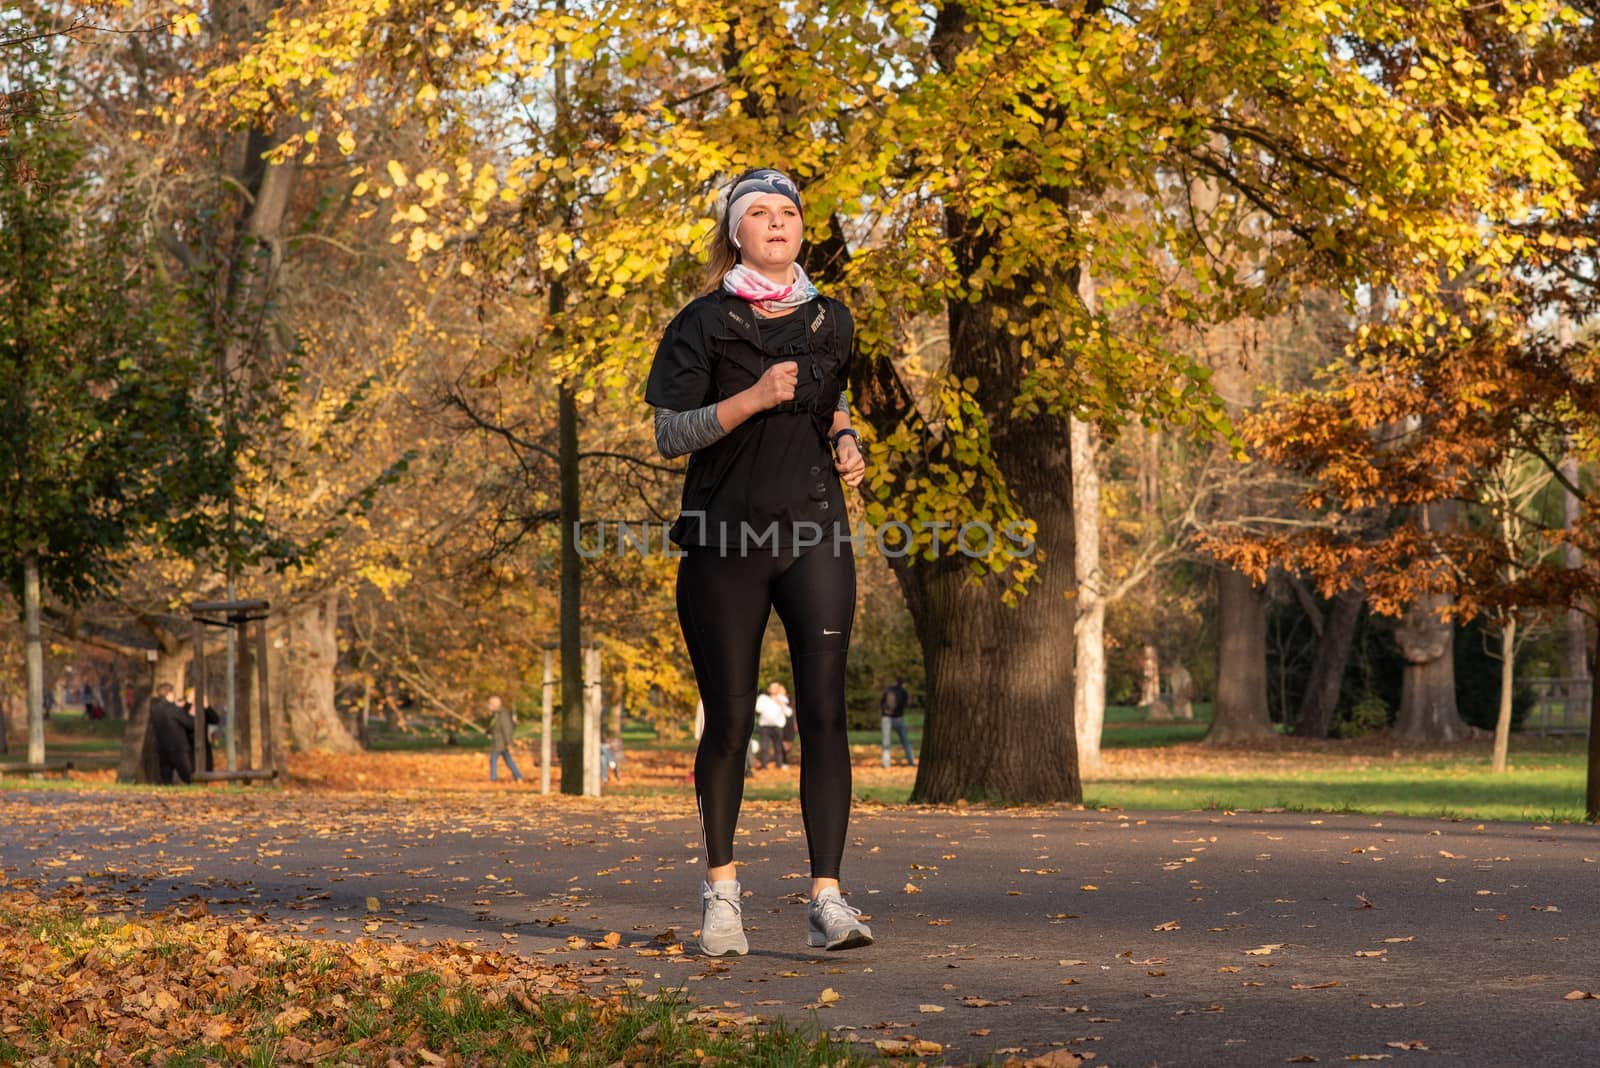 11/14/2020. Park Stromovka. Prague czech Republic. A woman is running in the park on a Sunday winter day. by gonzalobell